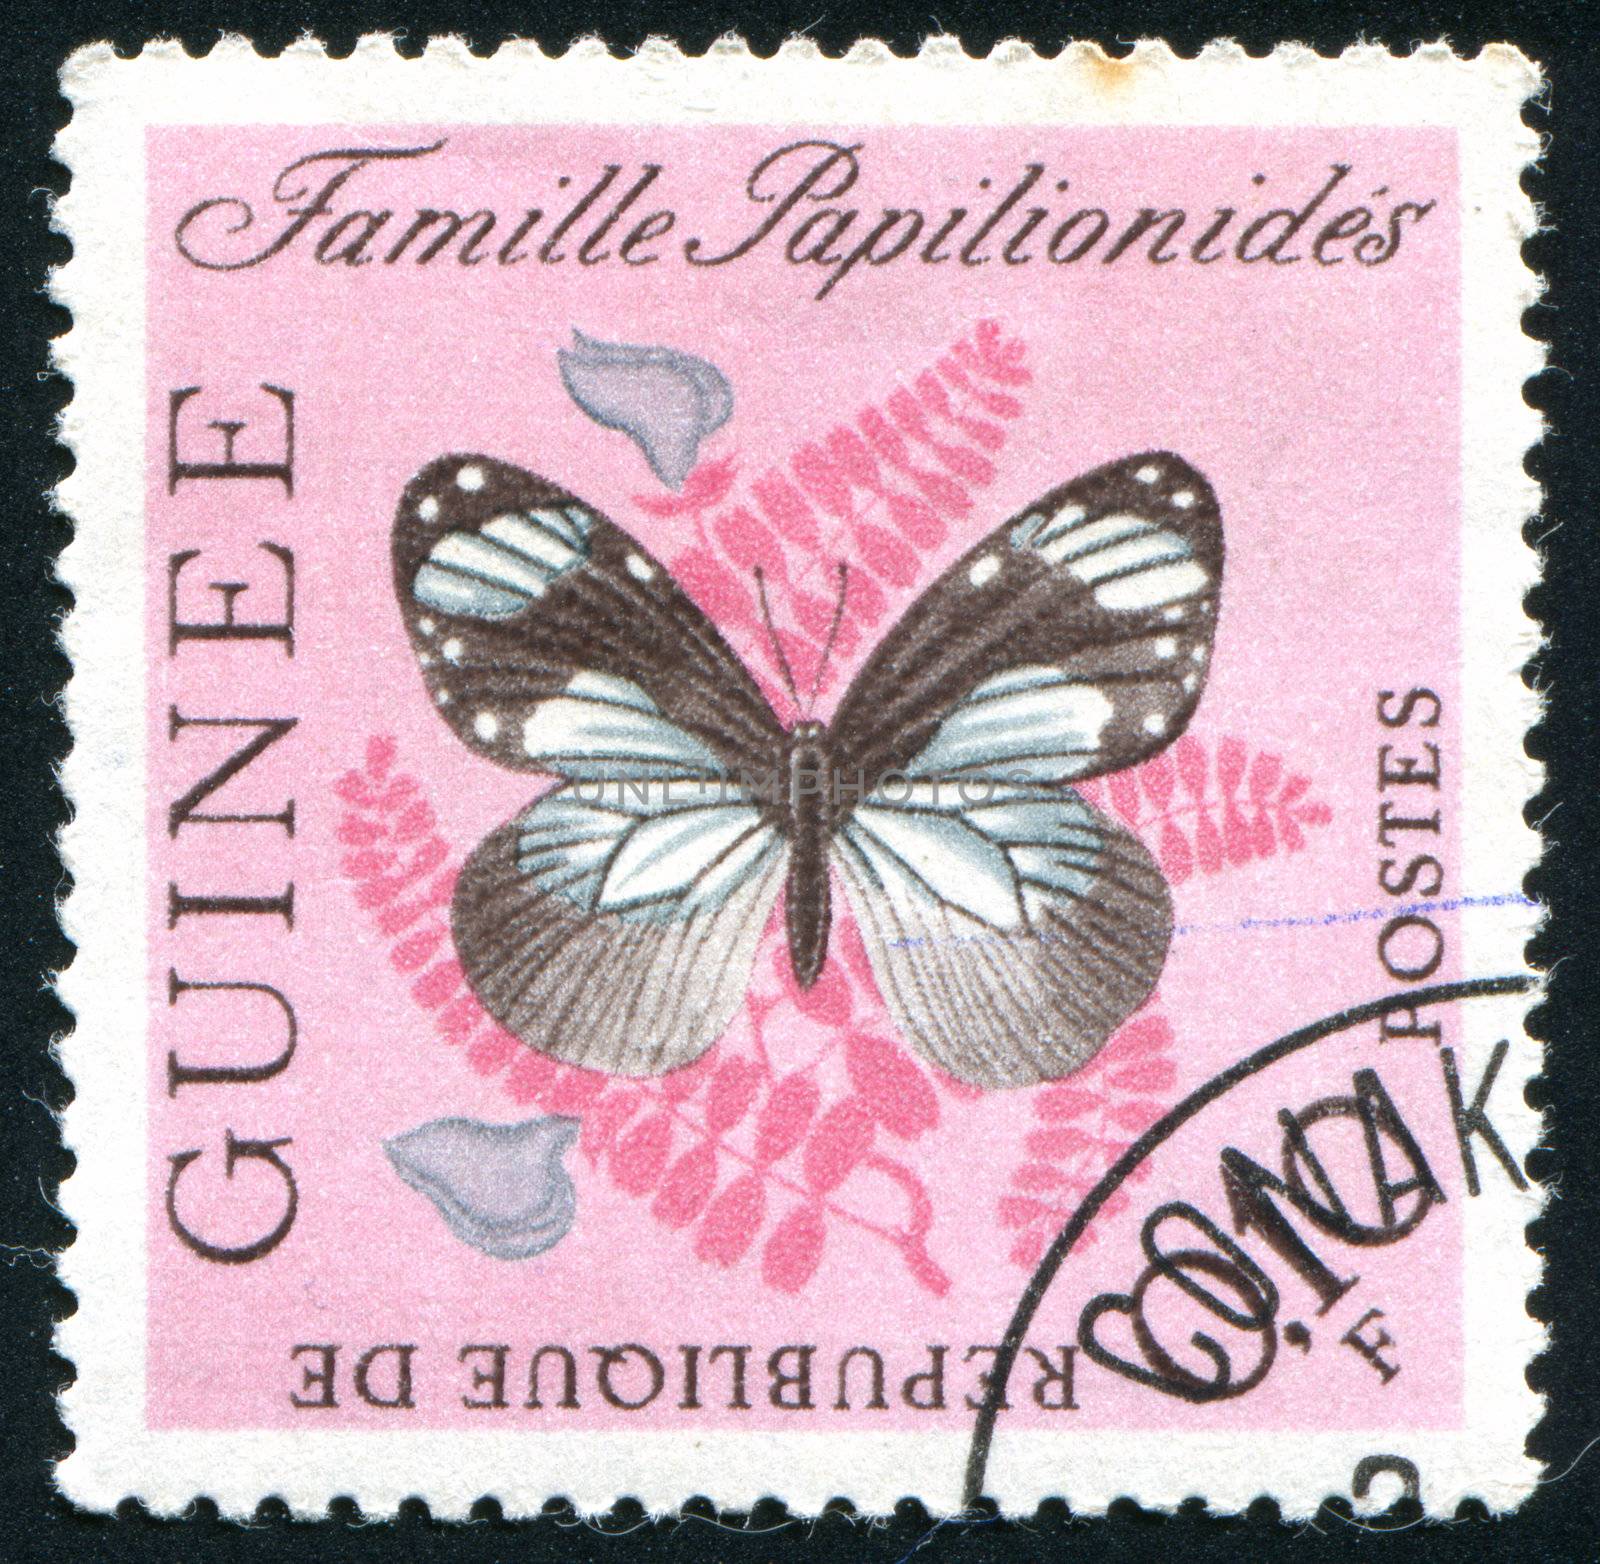 GUINEA - CIRCA 1972:   stamp printed by Guinea,  shows butterfly, circa 1972.